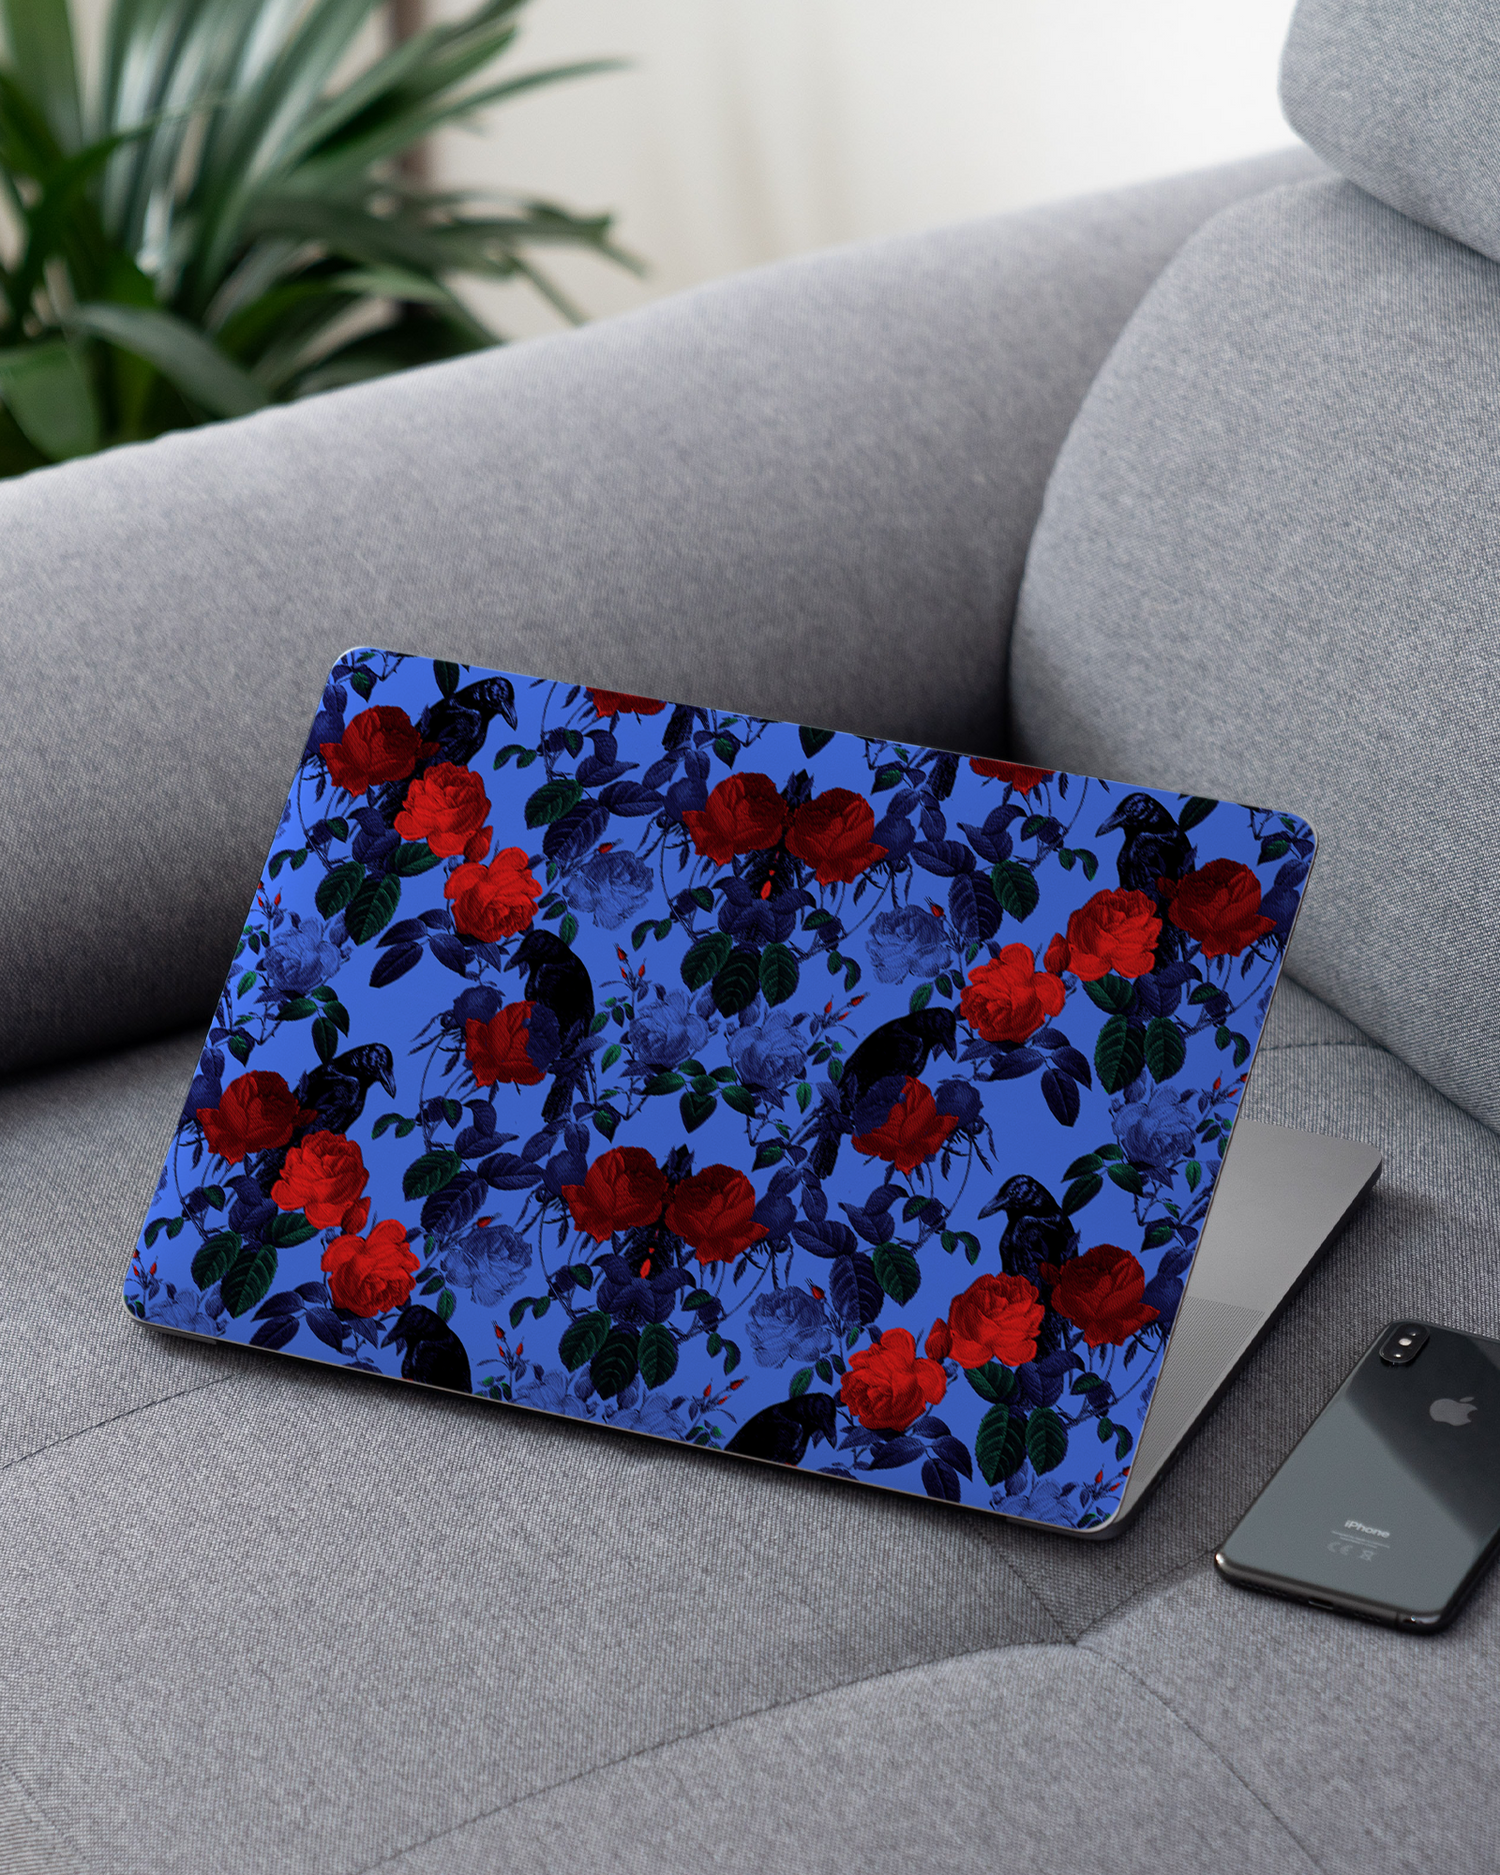 Roses And Ravens Laptop Skin for 13 inch Apple MacBooks on a couch